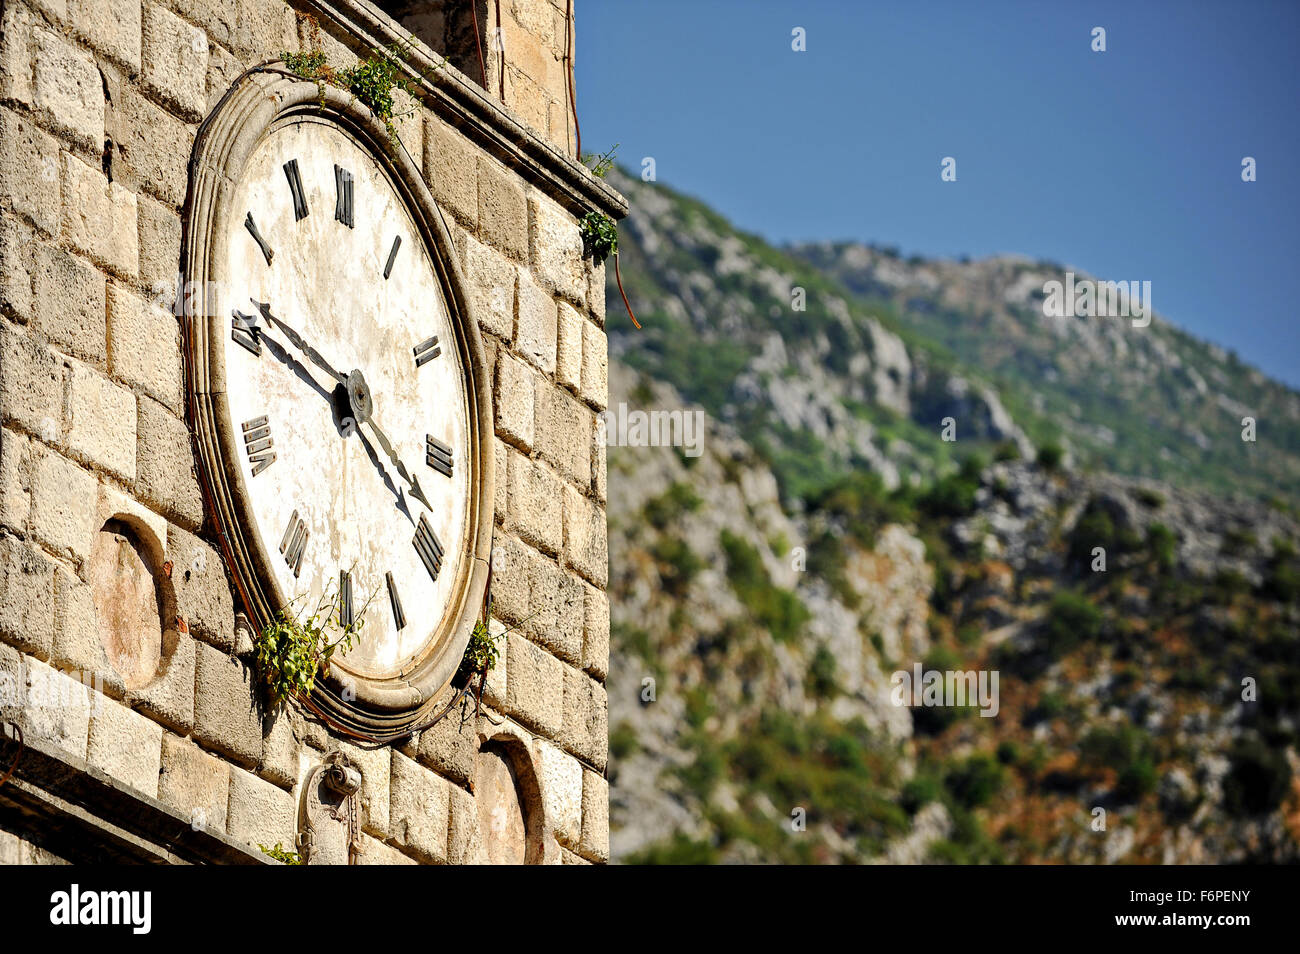 Old clock tower with vegetation growing on it in Kotor Stock Photo